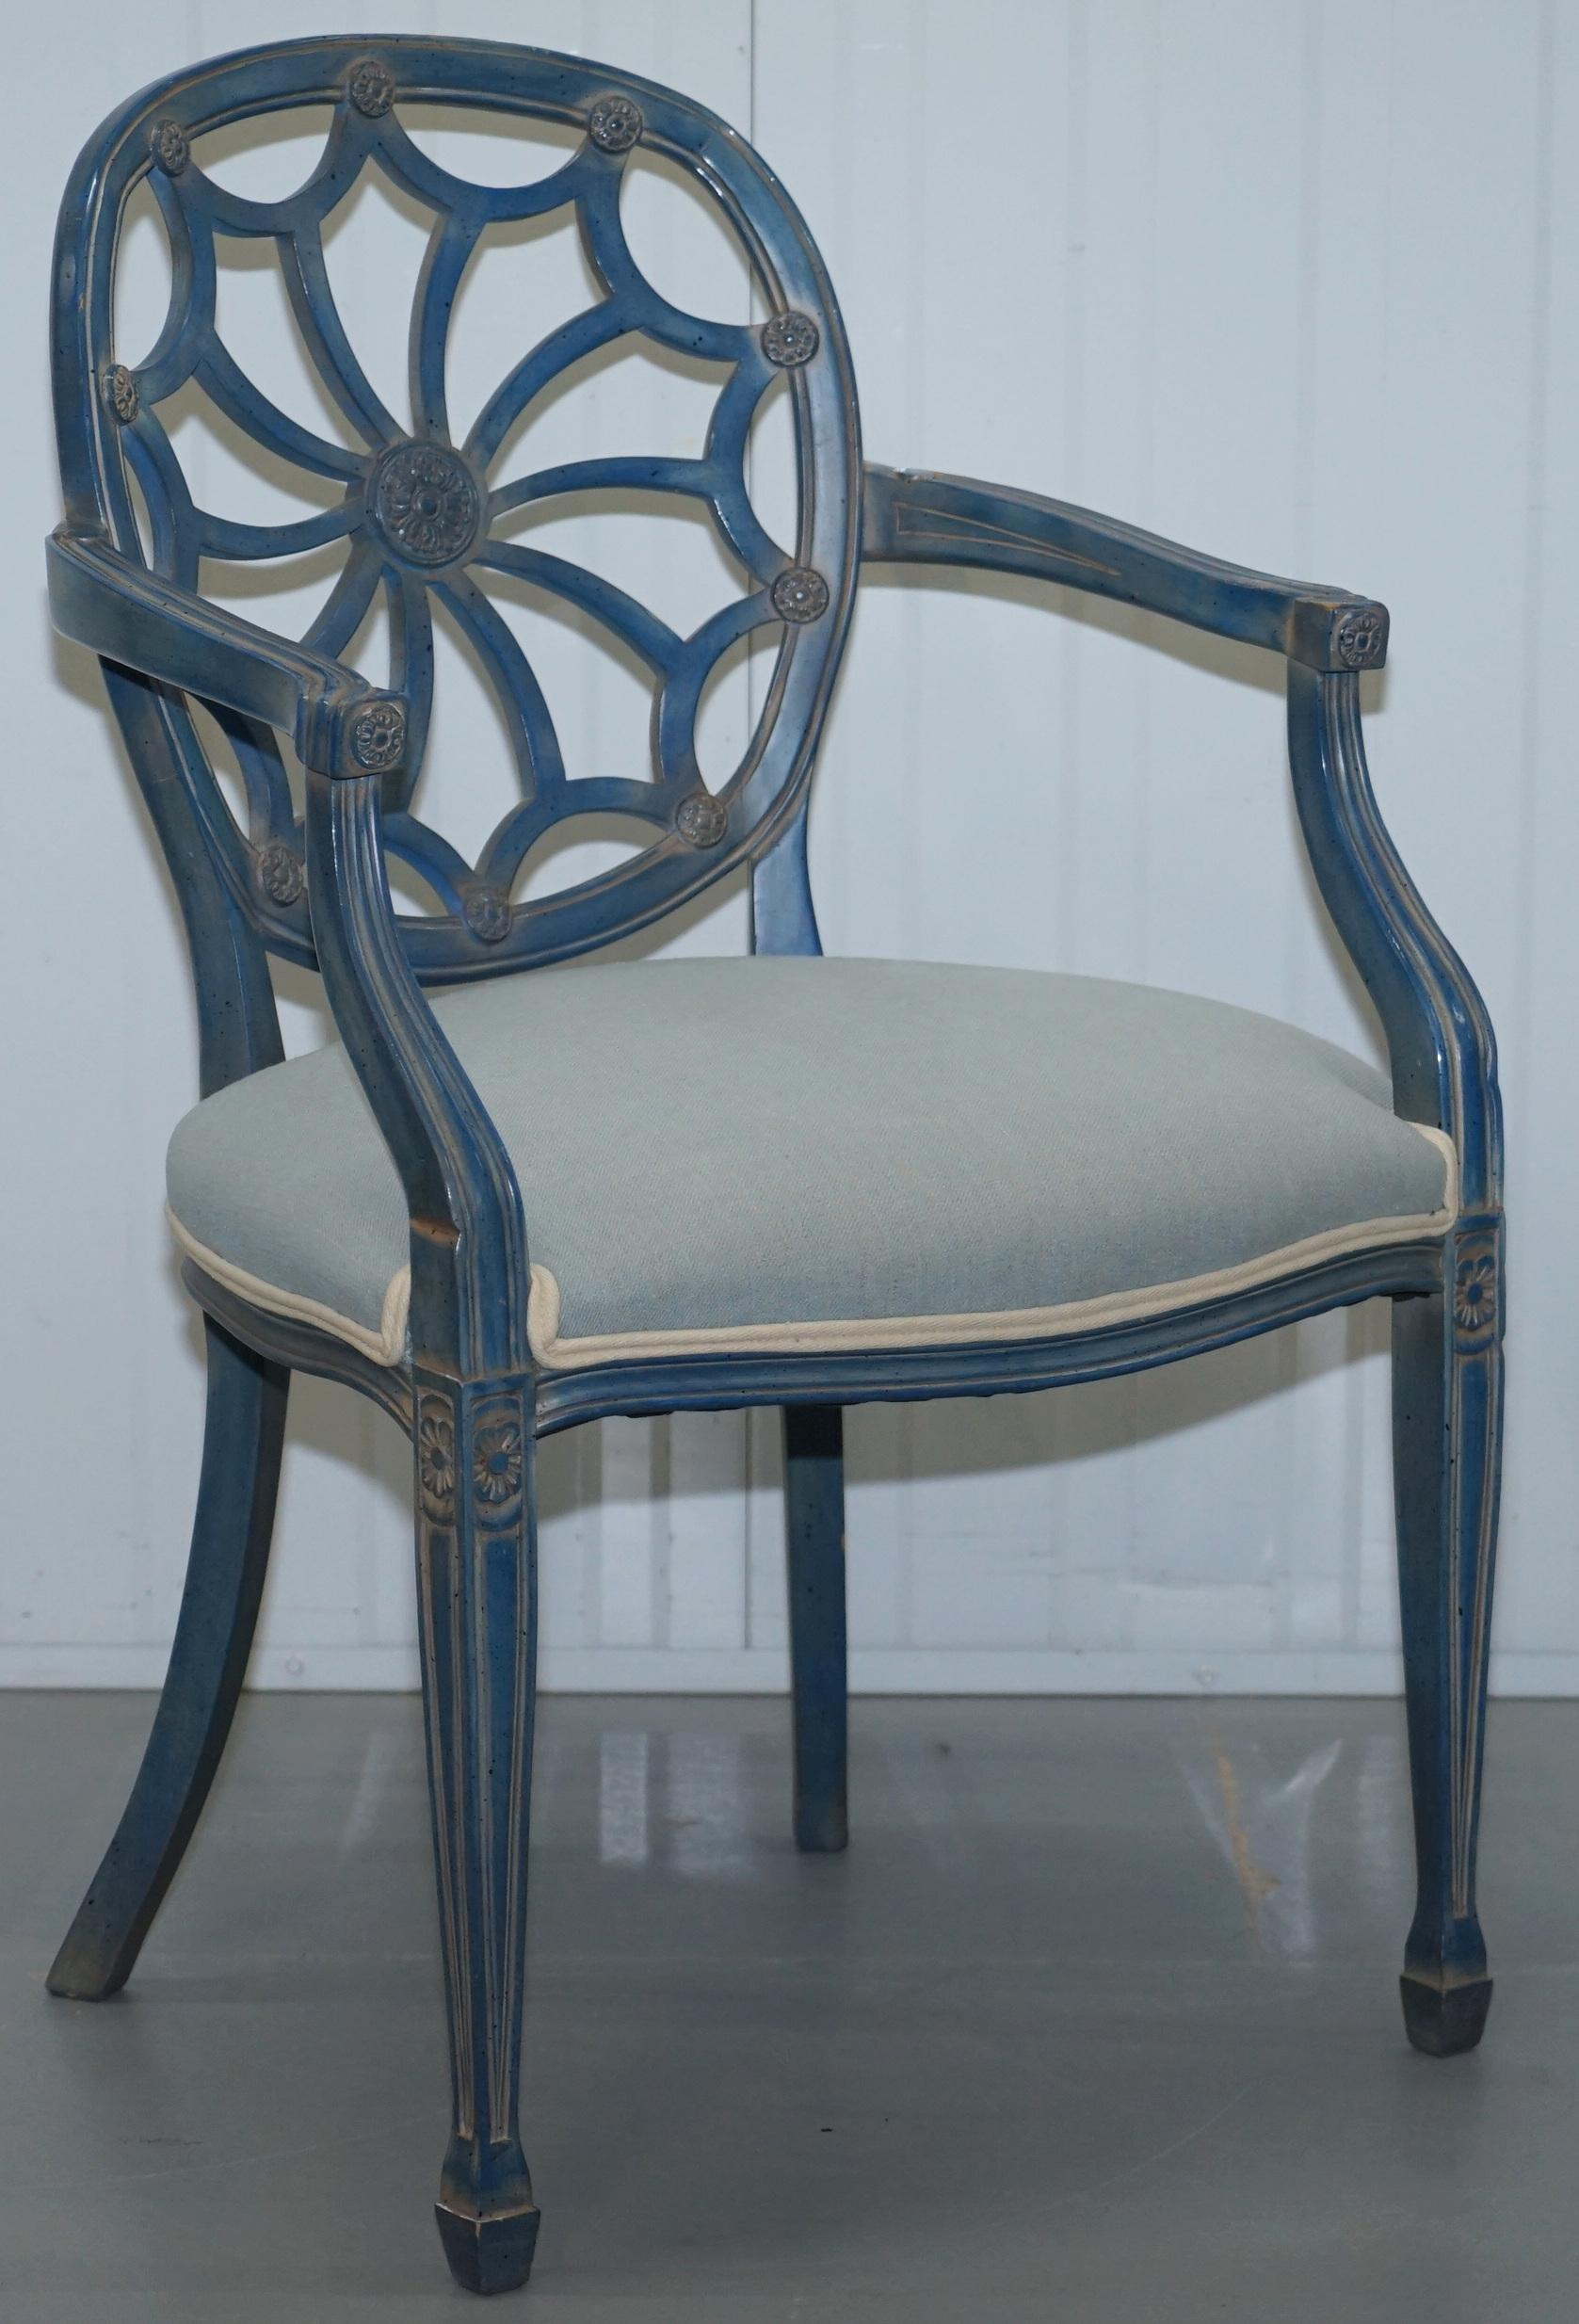 We are delighted to offer for sale this very rare pair of George Hepplewhite Spider Web back occasional carver armchairs

These chairs are one of the most iconic designs by arguably one of the greatest furniture makers the United Kingdom has ever